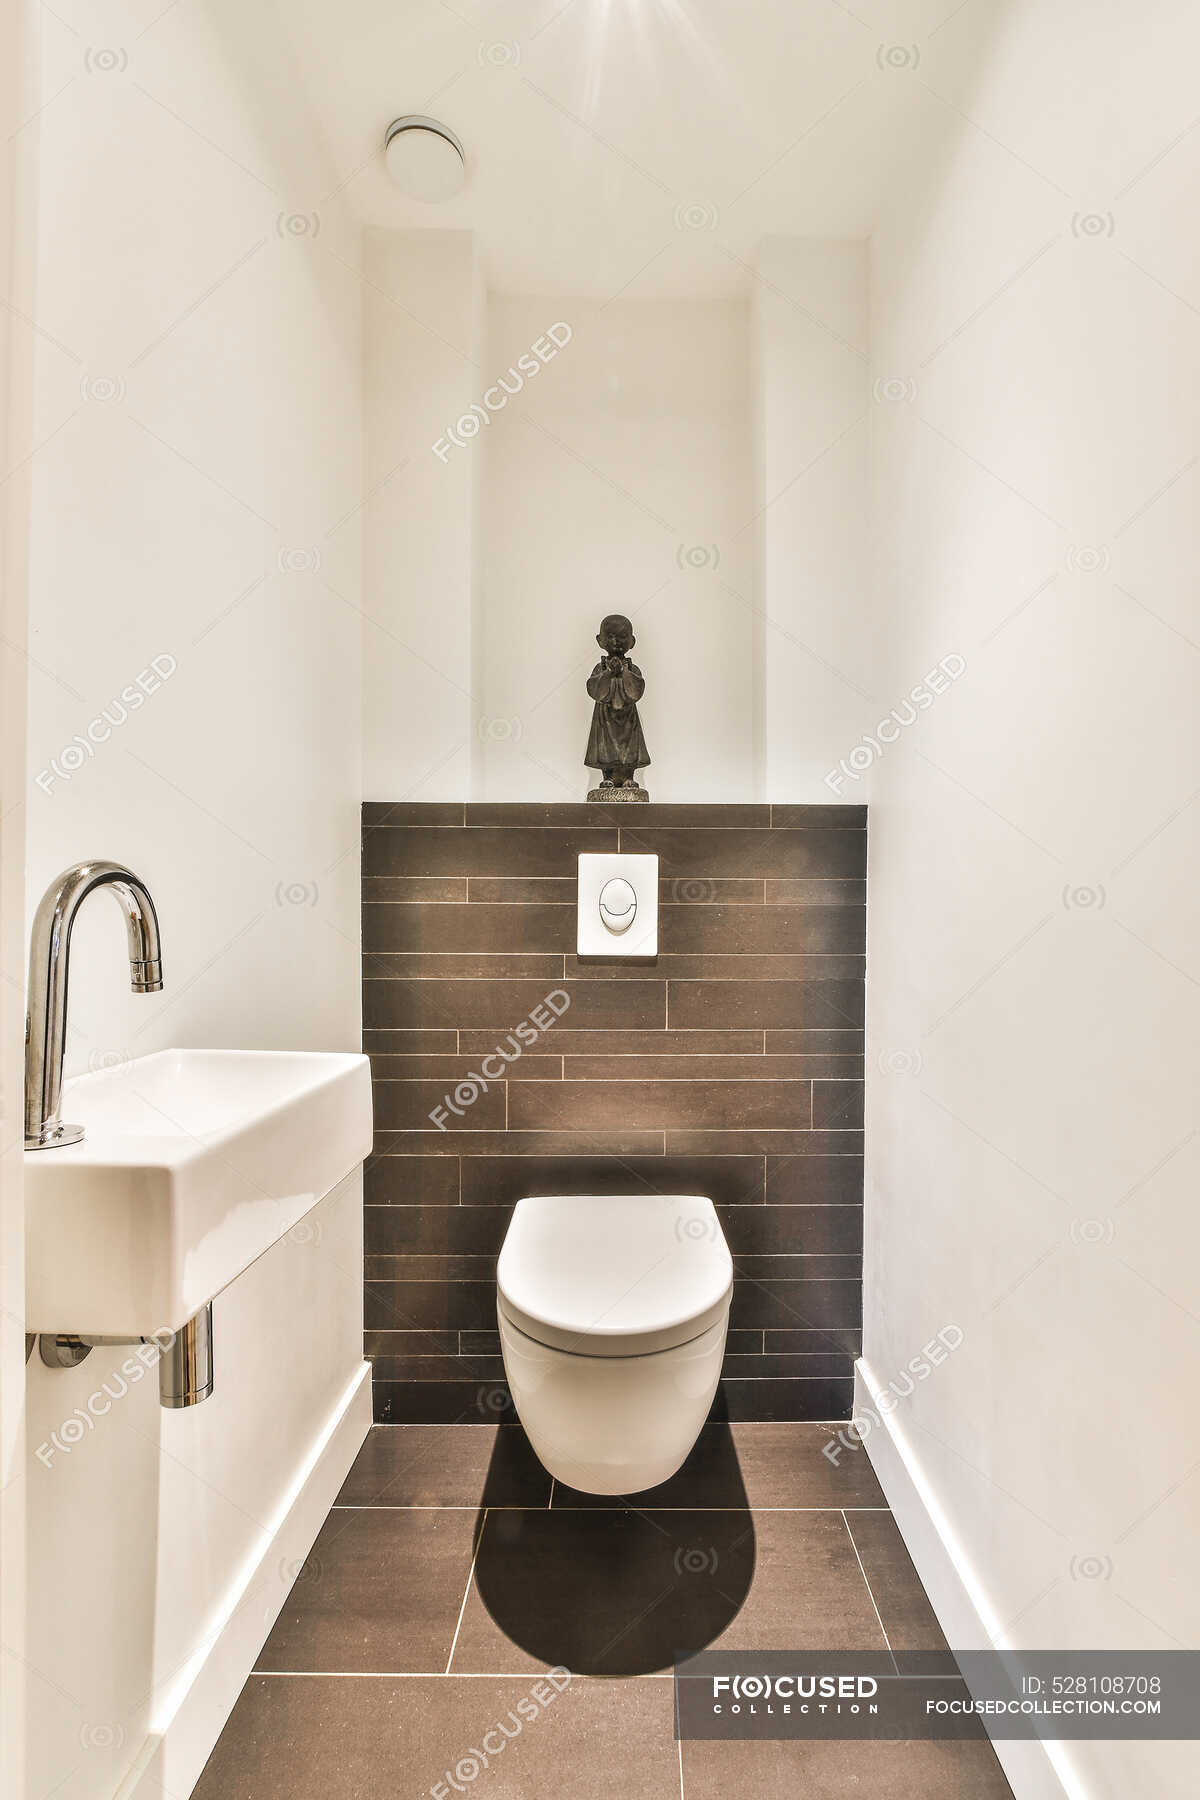 College verslag doen van Algebraïsch Creative design of bathroom with toilet bowl under statuette against  washstand with faucet in light house — minimalist, contrast - Stock Photo |  #528108708